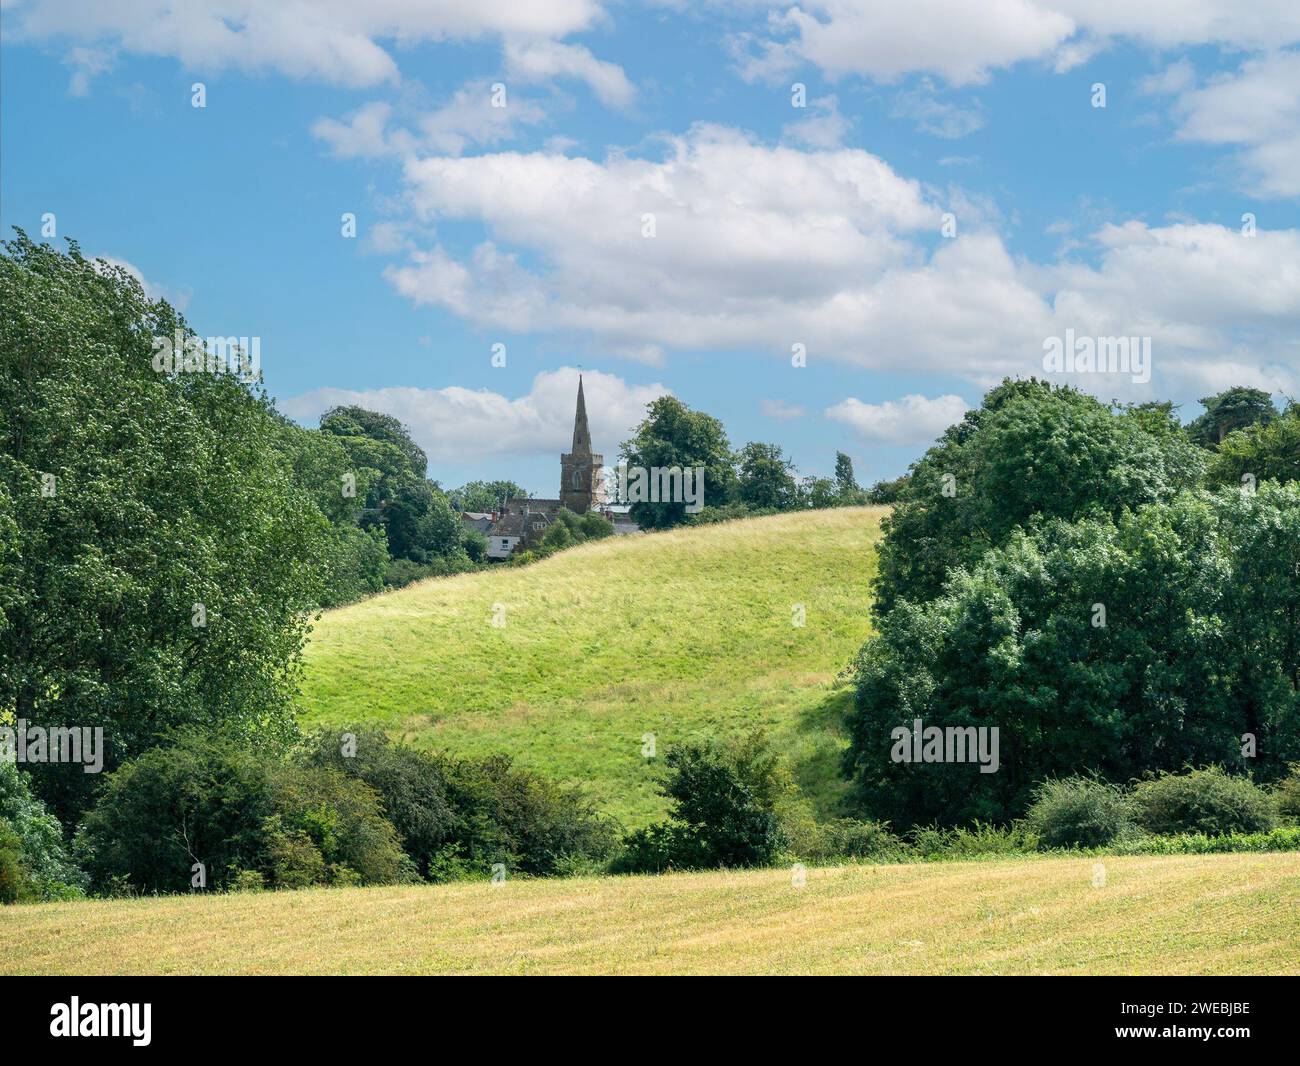 Pretty old houses and tower of Somerby Parish church as seen in the distance across farm fields, Somerby, Leicestershire, England, UK Stock Photo